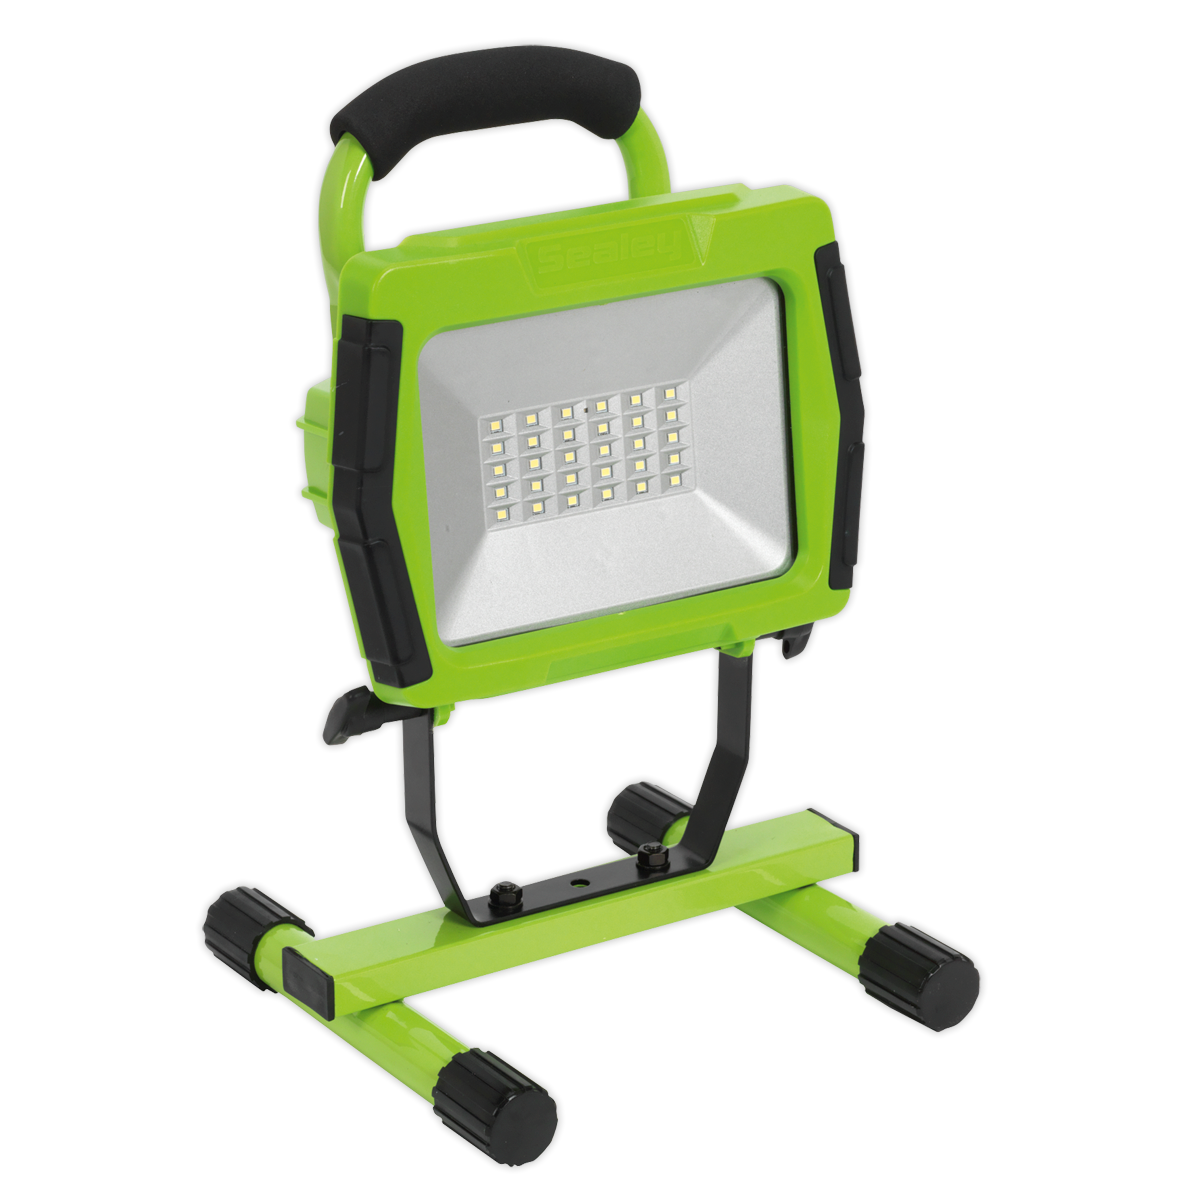 SEALEY FLOODLIGHT PORTABLE RECHARGEABLE 30SMD LED Lithium-ion GREEN